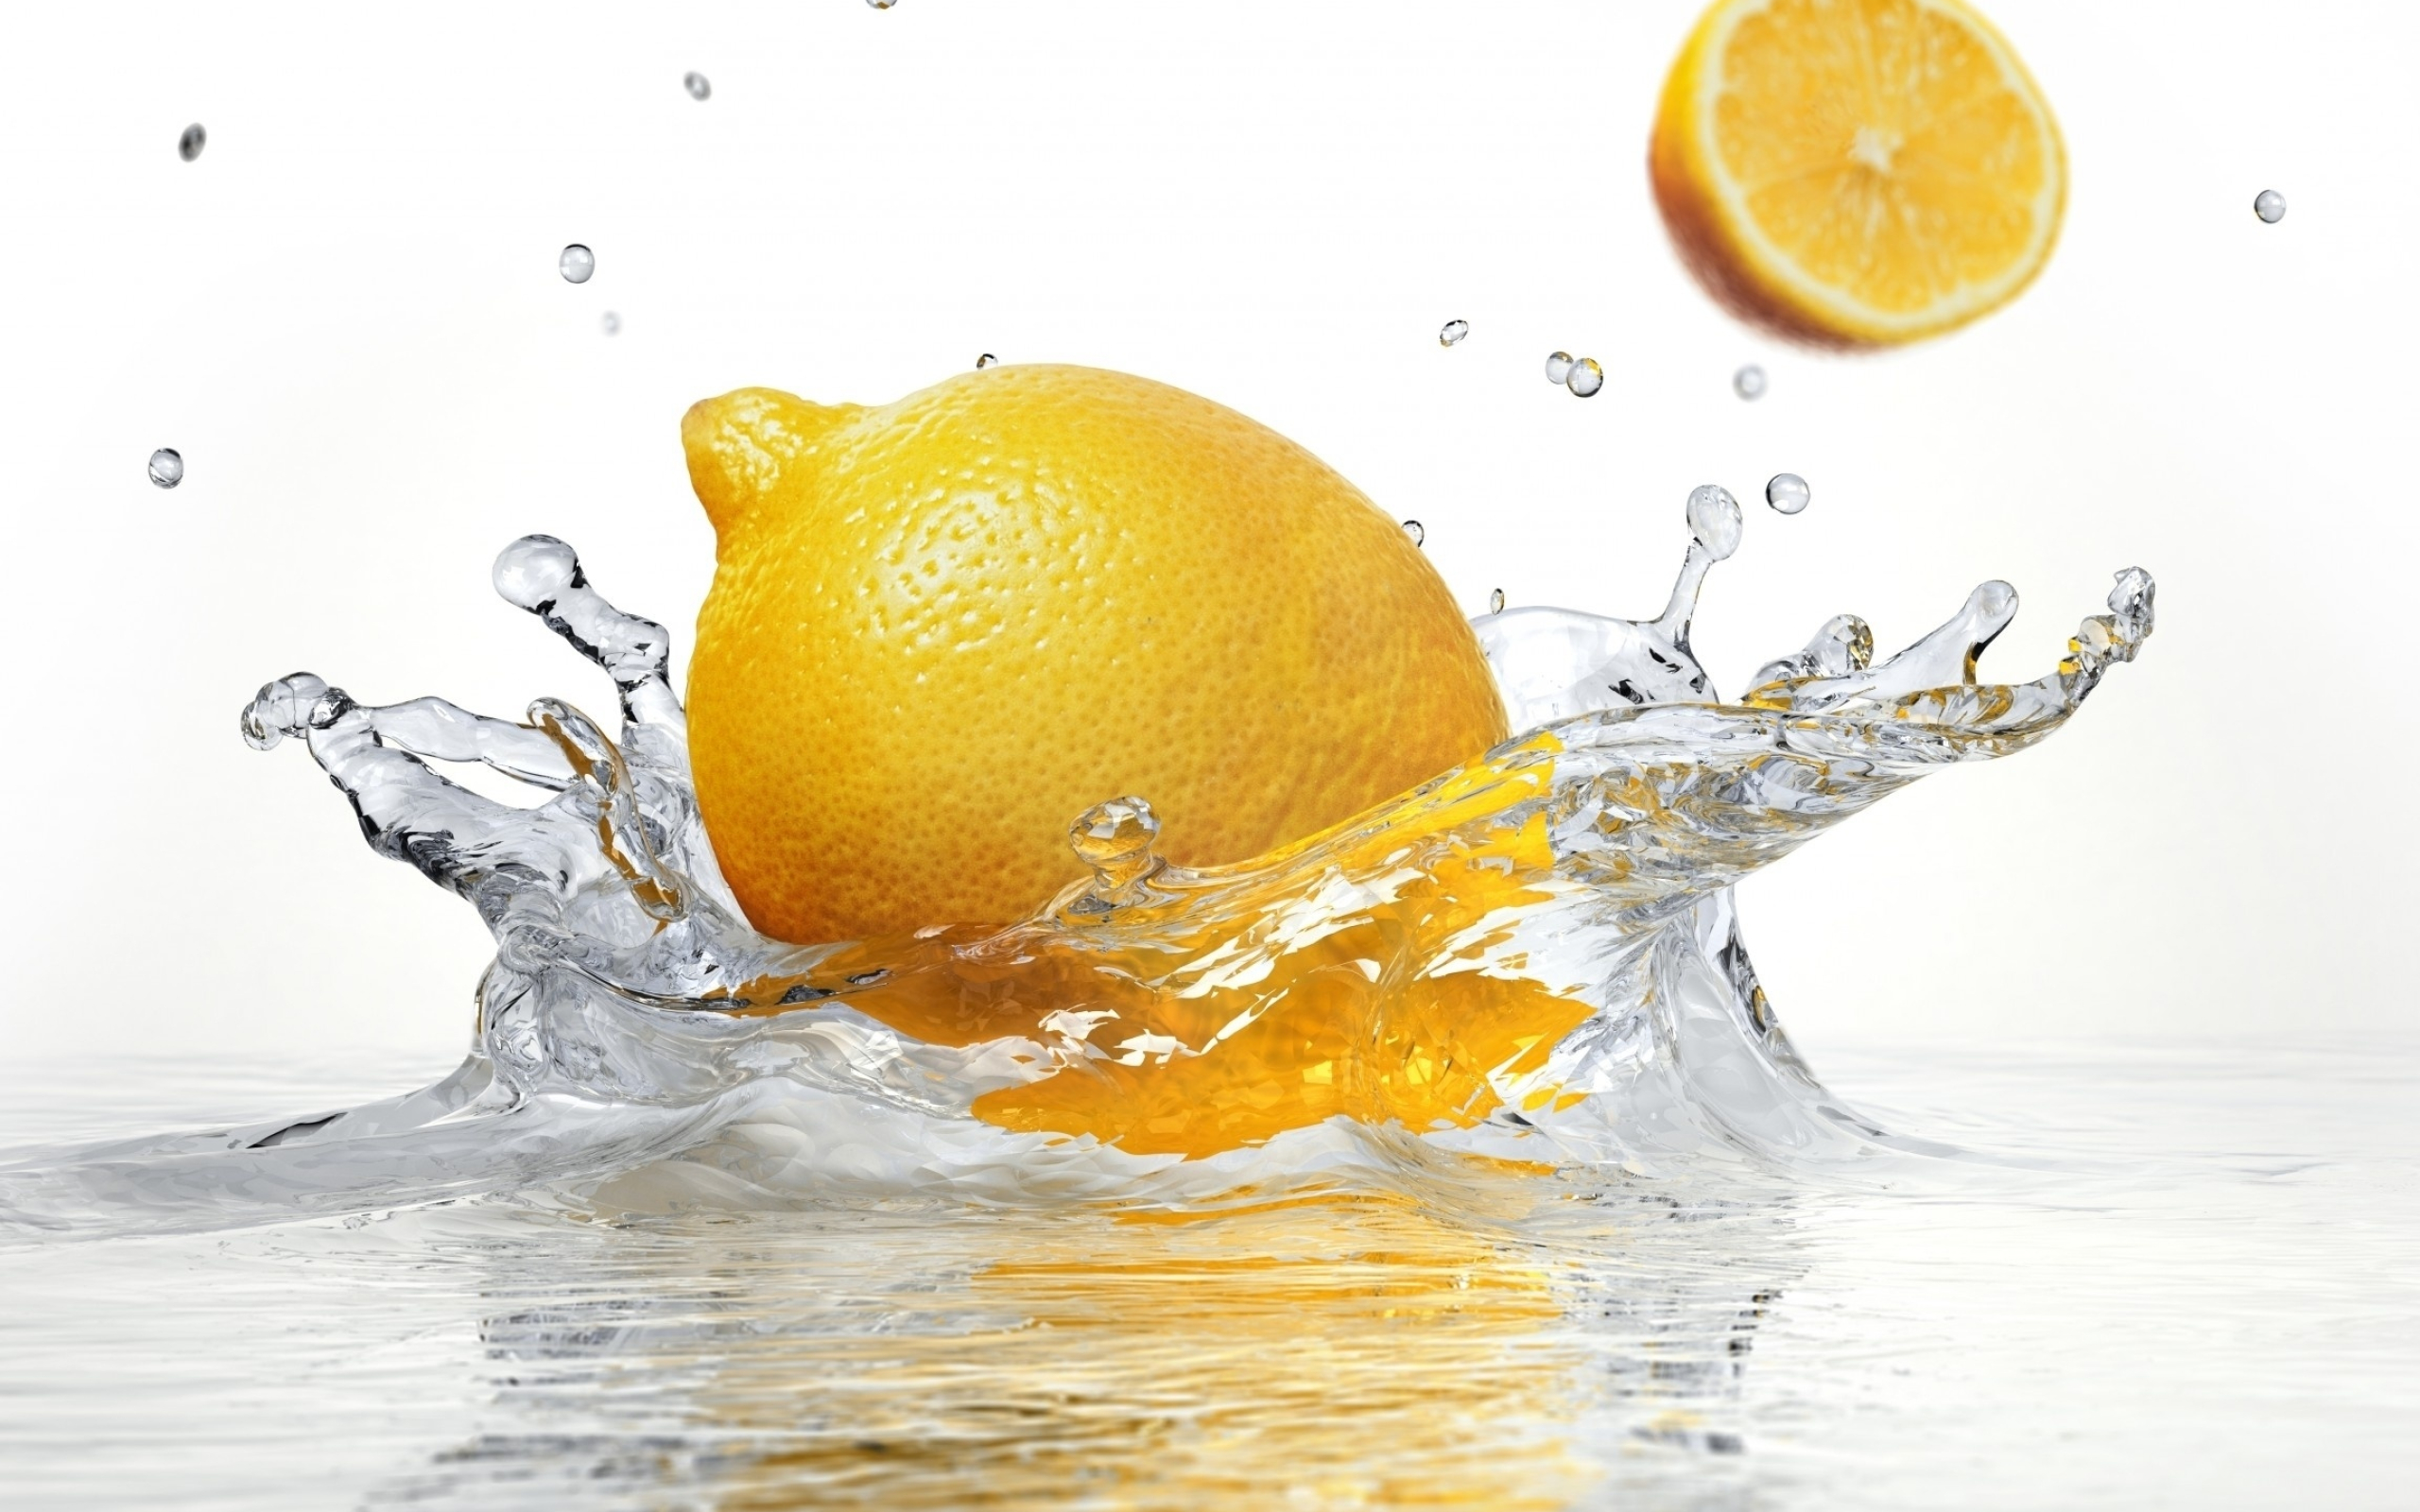 Lemon: Its juice contains slightly more citric acid than lime juice. 2560x1600 HD Background.